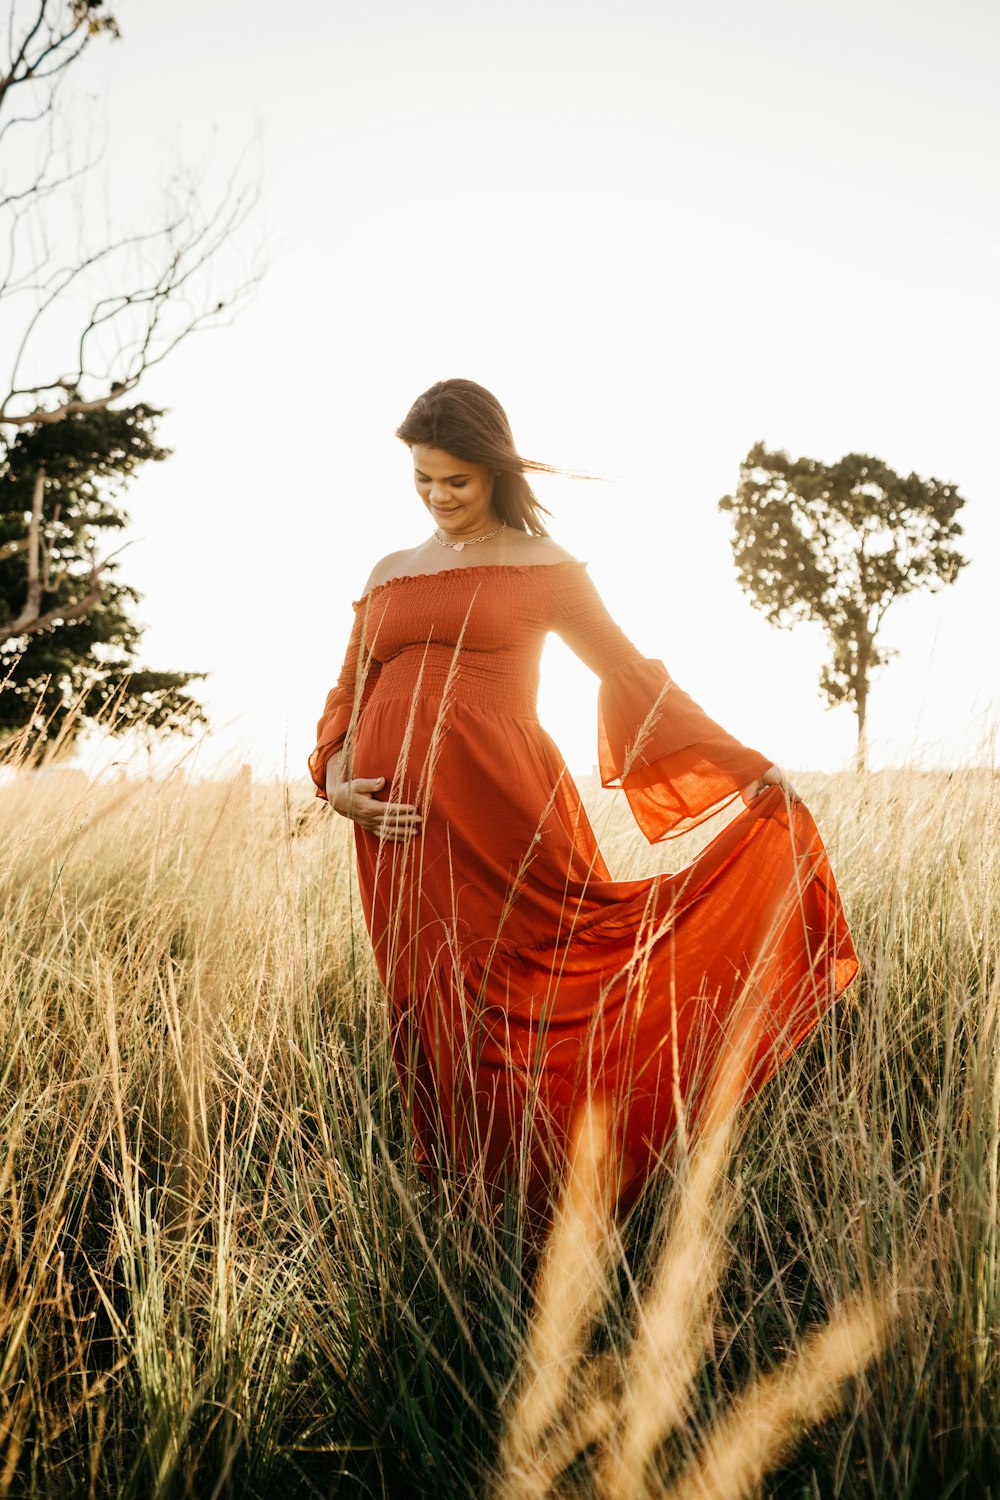 woman in orange dress standing on grass field during daytime